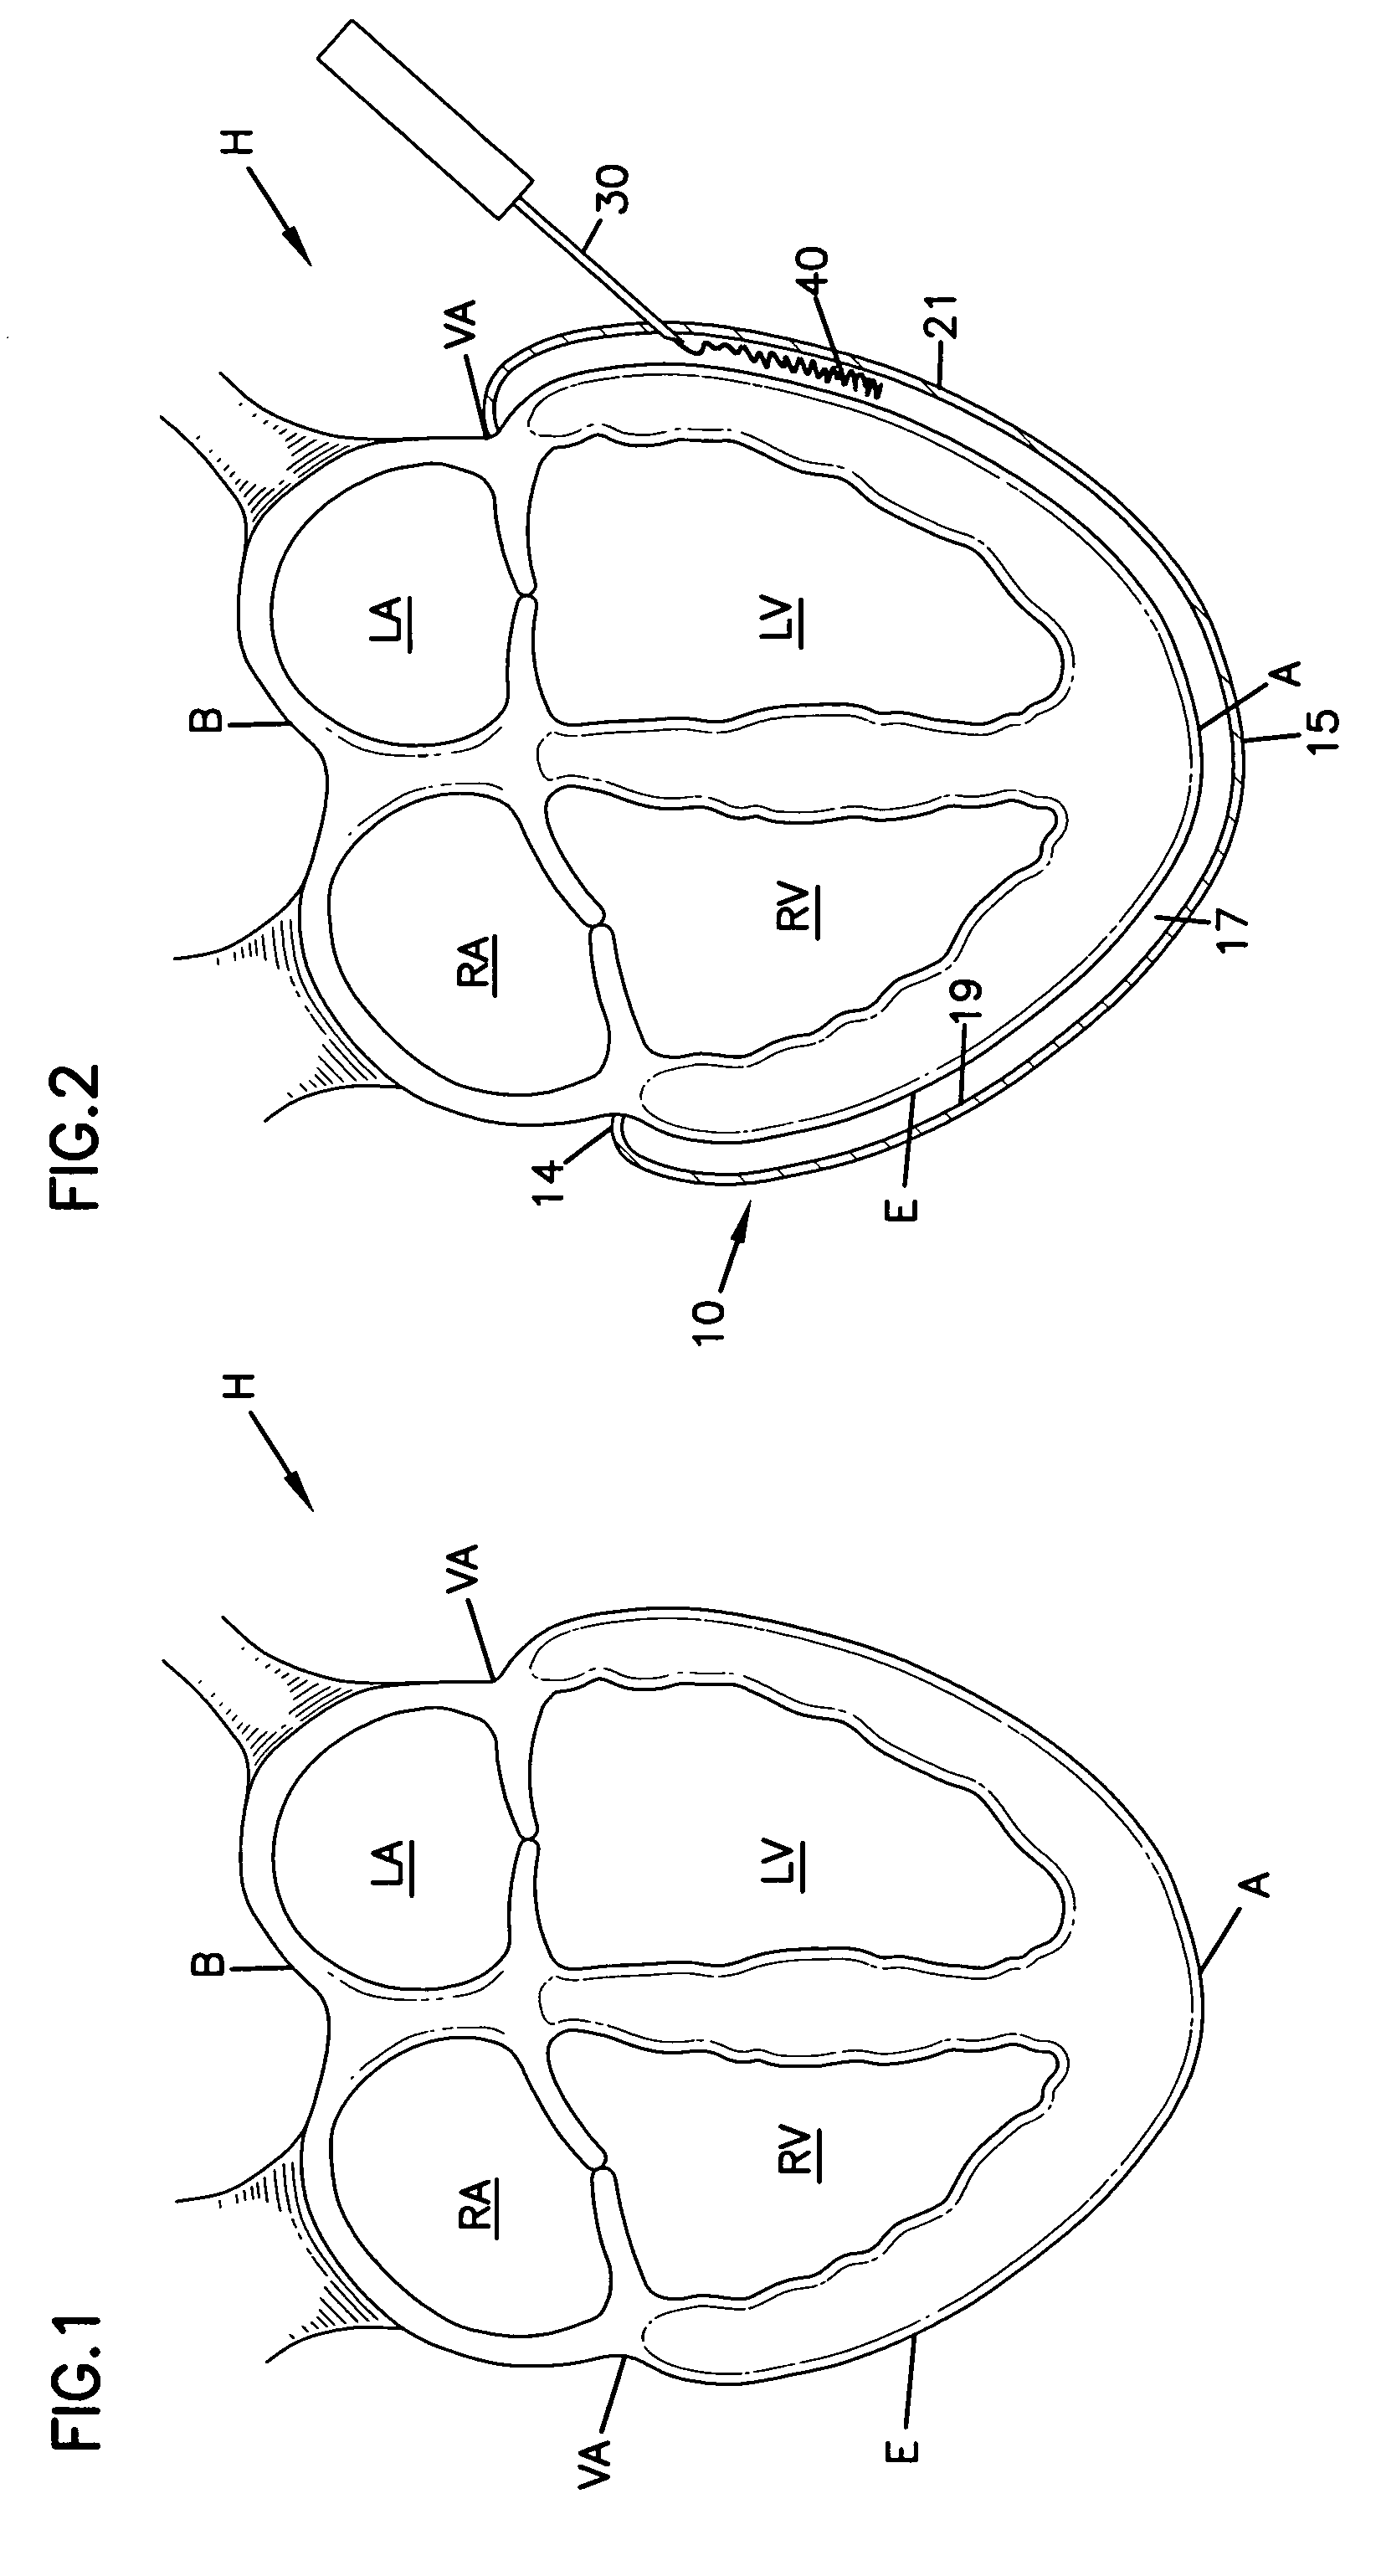 Cardiac wall tension relief device and method